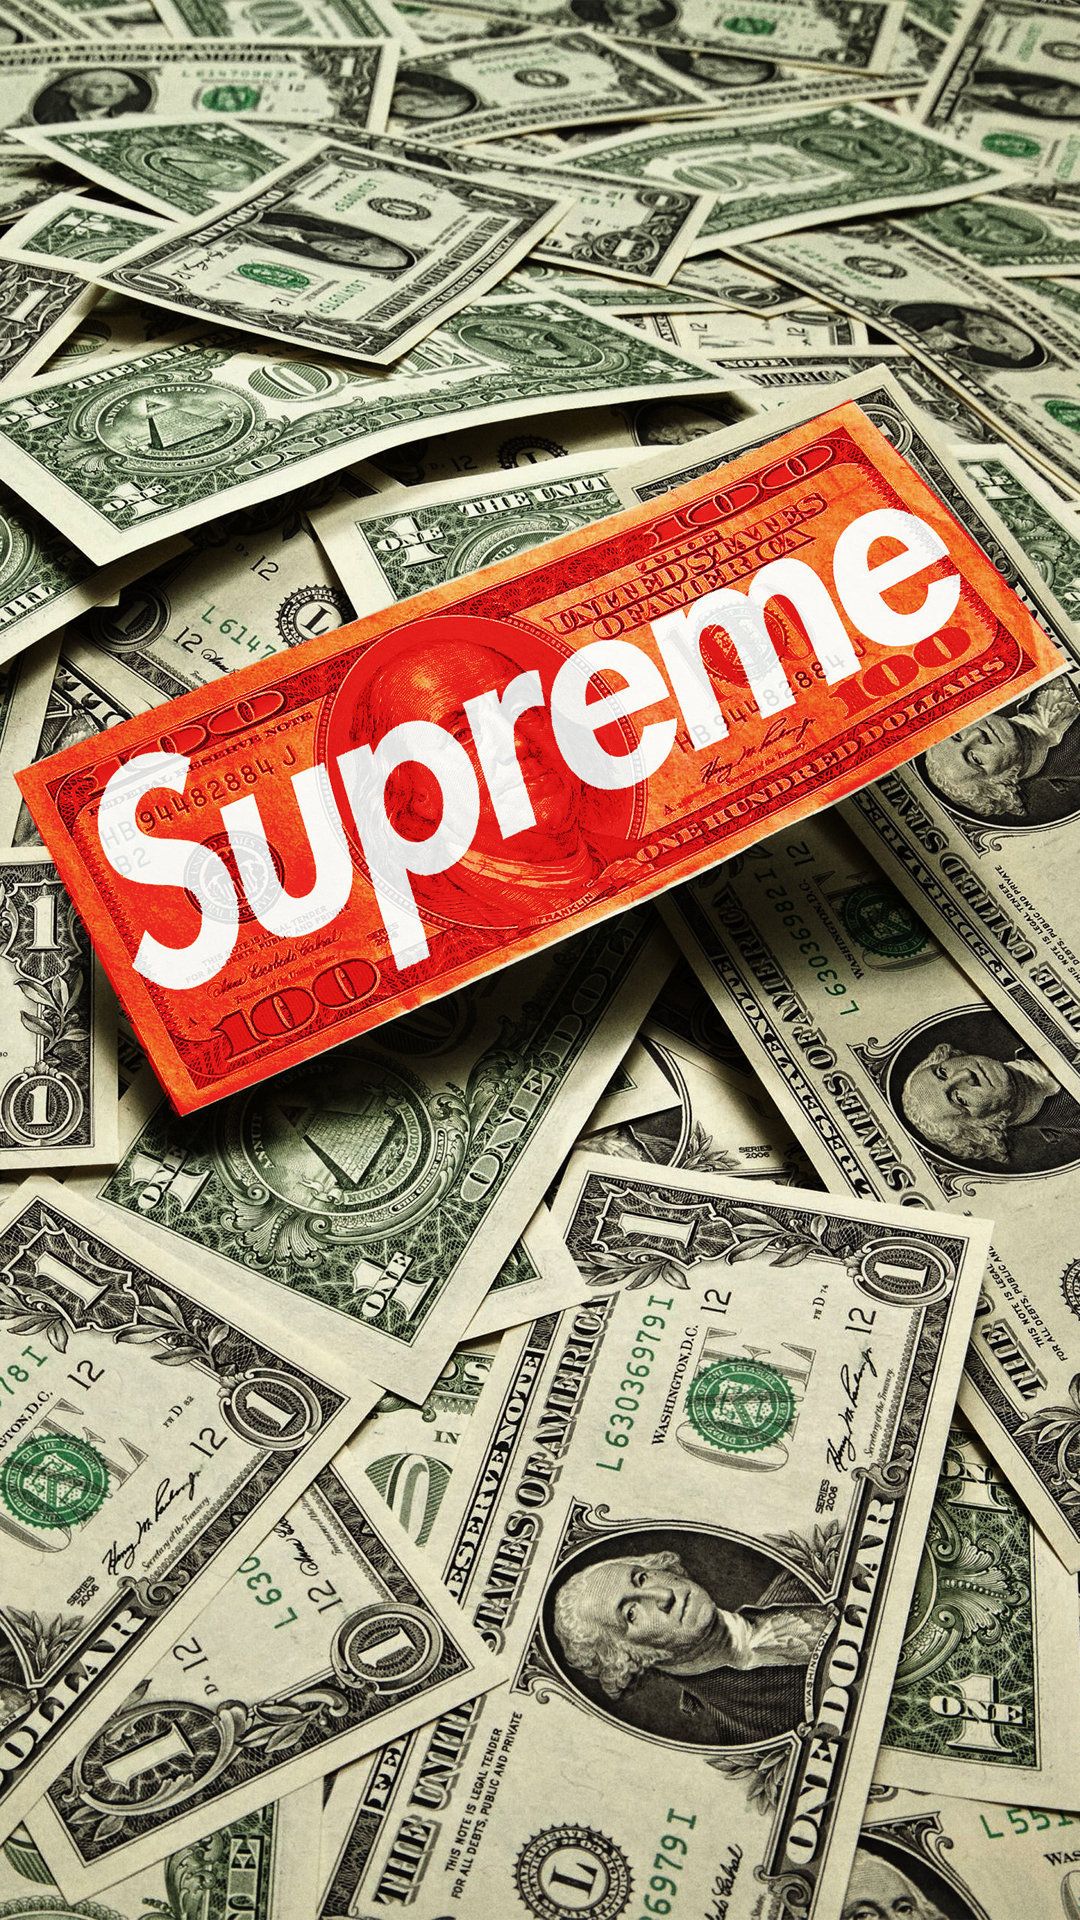 Supreme Iphone 5 Wallpapers